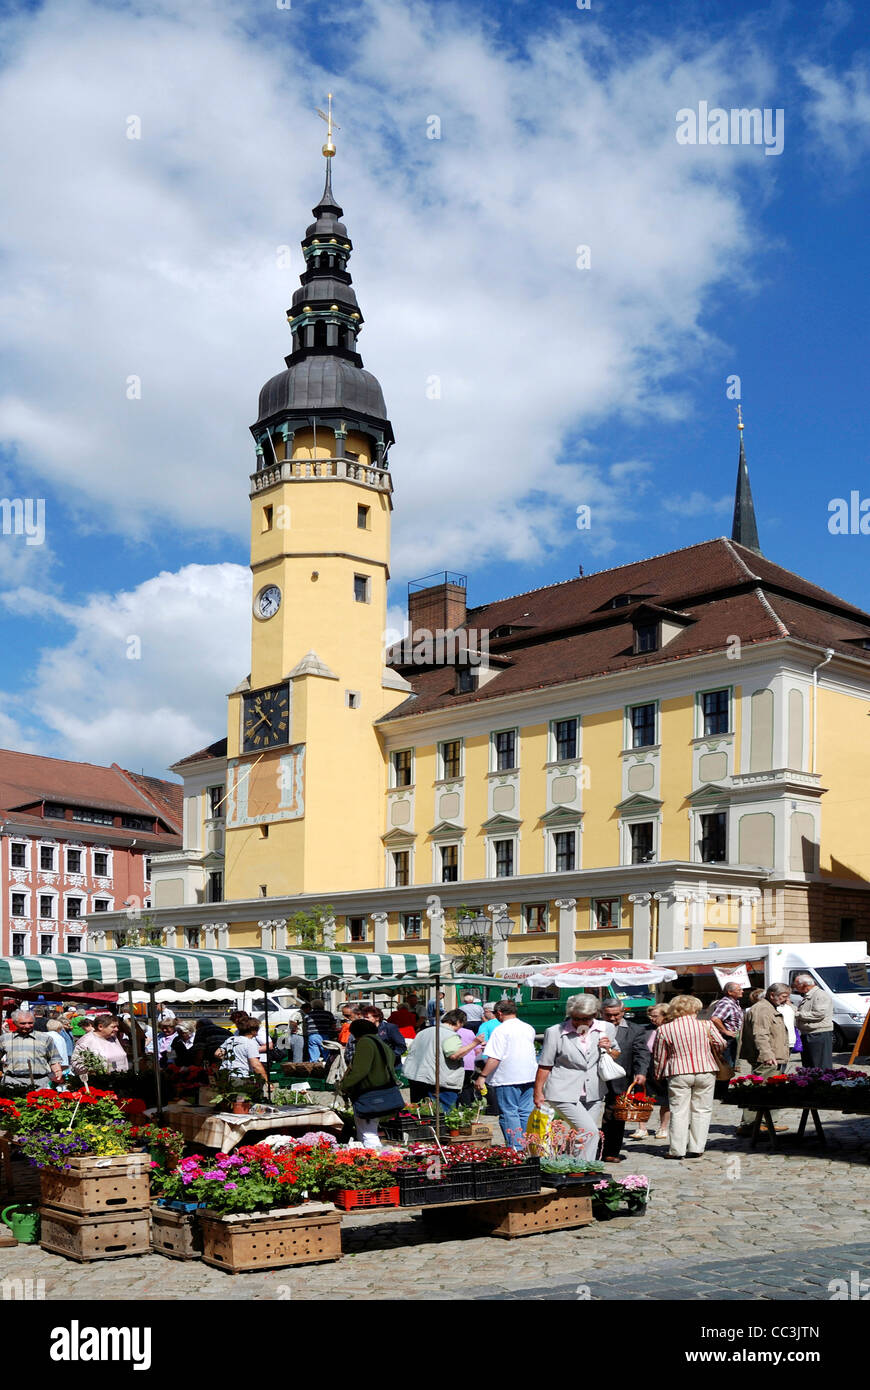 City hall of the historical old town of Bautzen. Stock Photo